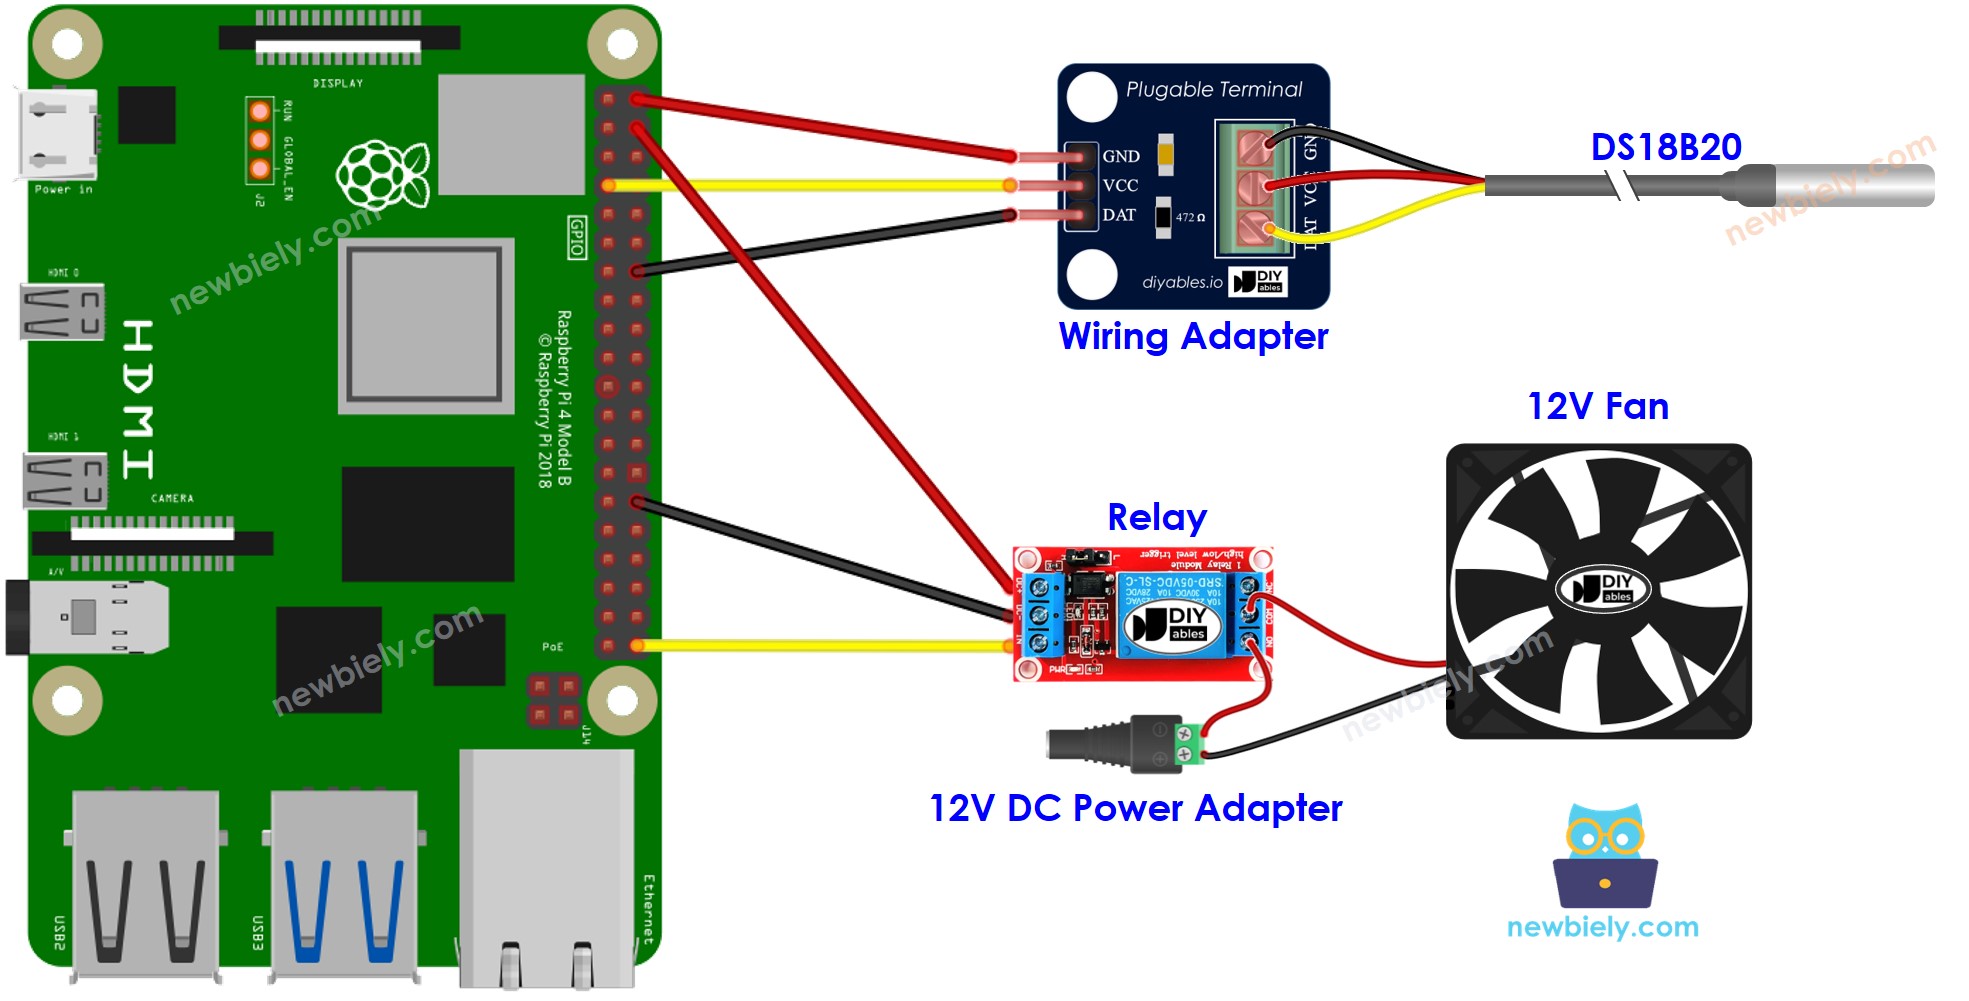 The wiring diagram between Raspberry Pi and cooling fan system